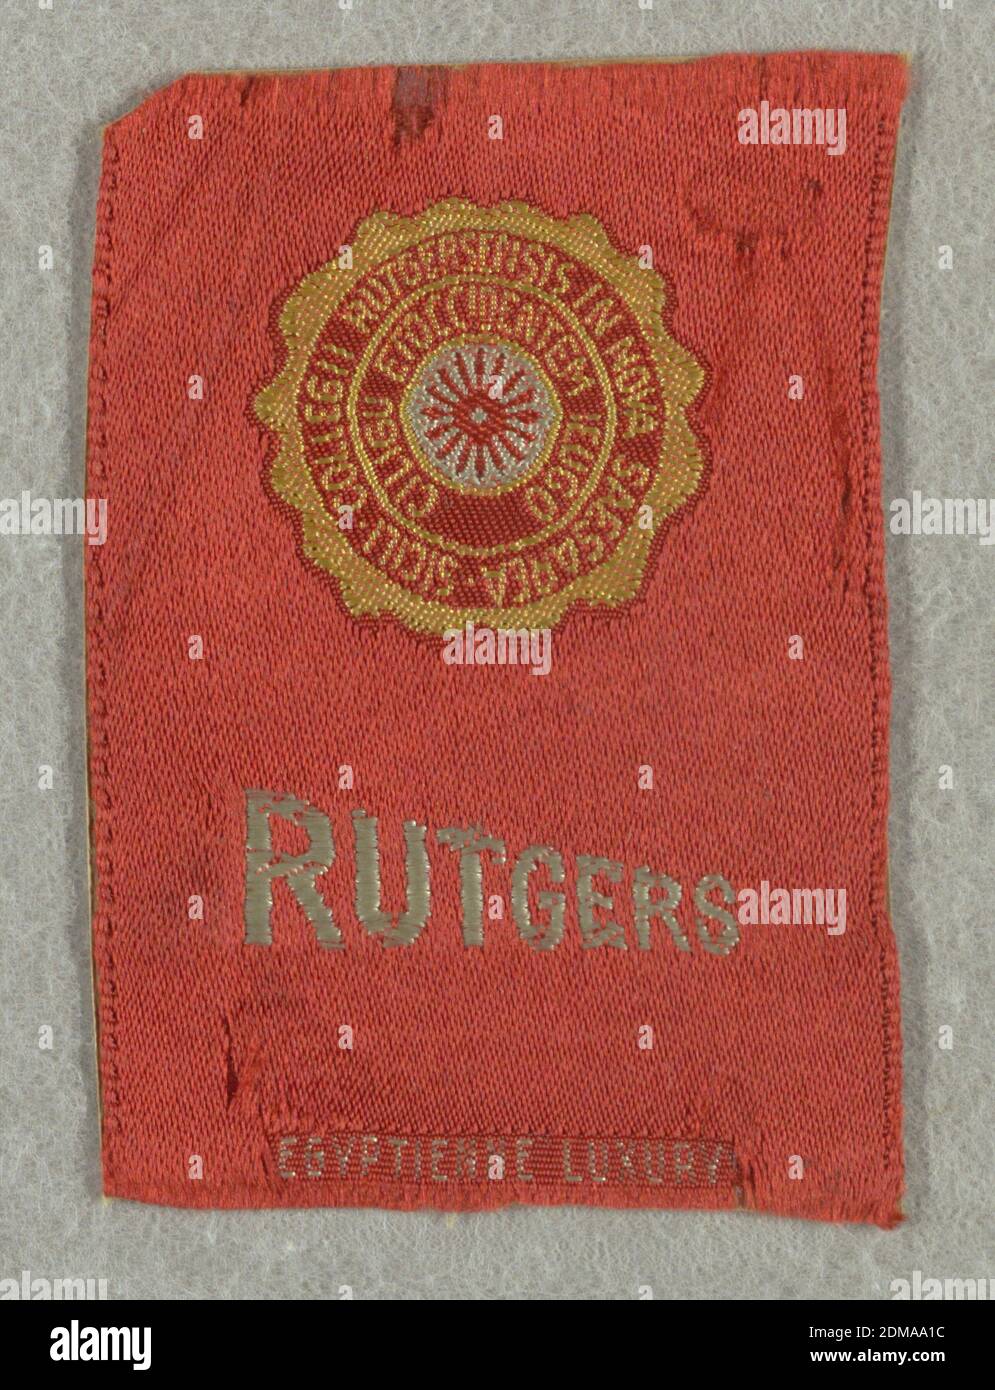 Souvenir, Medium: silk Technique: satin weave with supplementary weft, Red tobacco silk from Egyptienne Luxury cigarettes with seal of Rutgers University in yellow and white. Just below is 'Rutgers' in white sloping capital letters., USA, ca. 1910, woven textiles, Souvenir Stock Photo